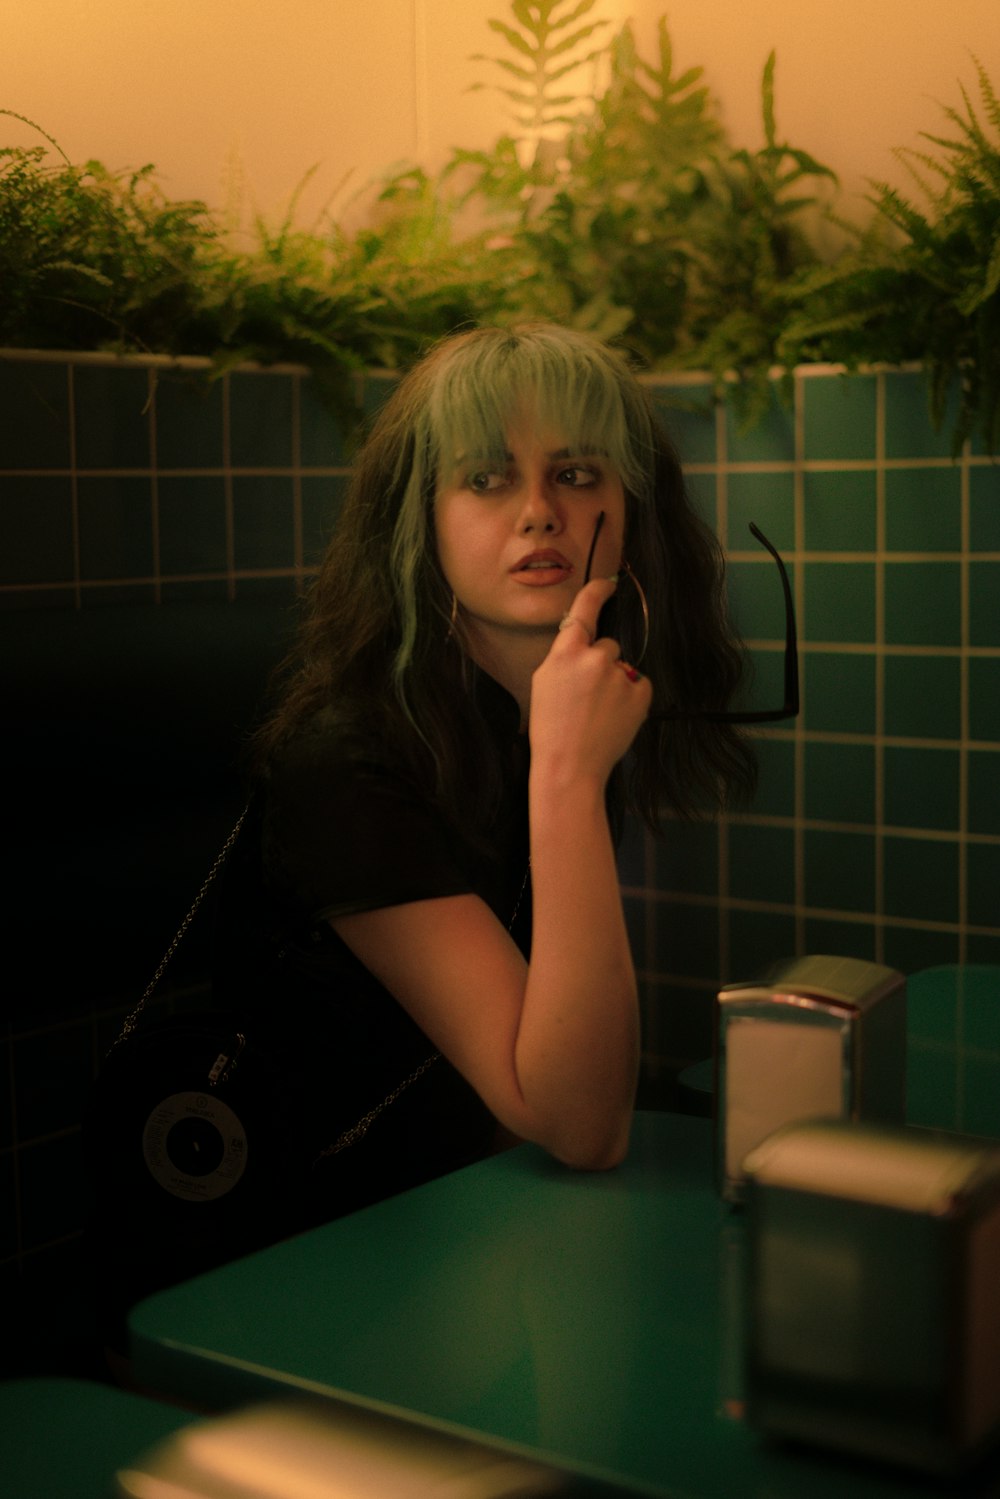 a woman with green hair sitting at a table